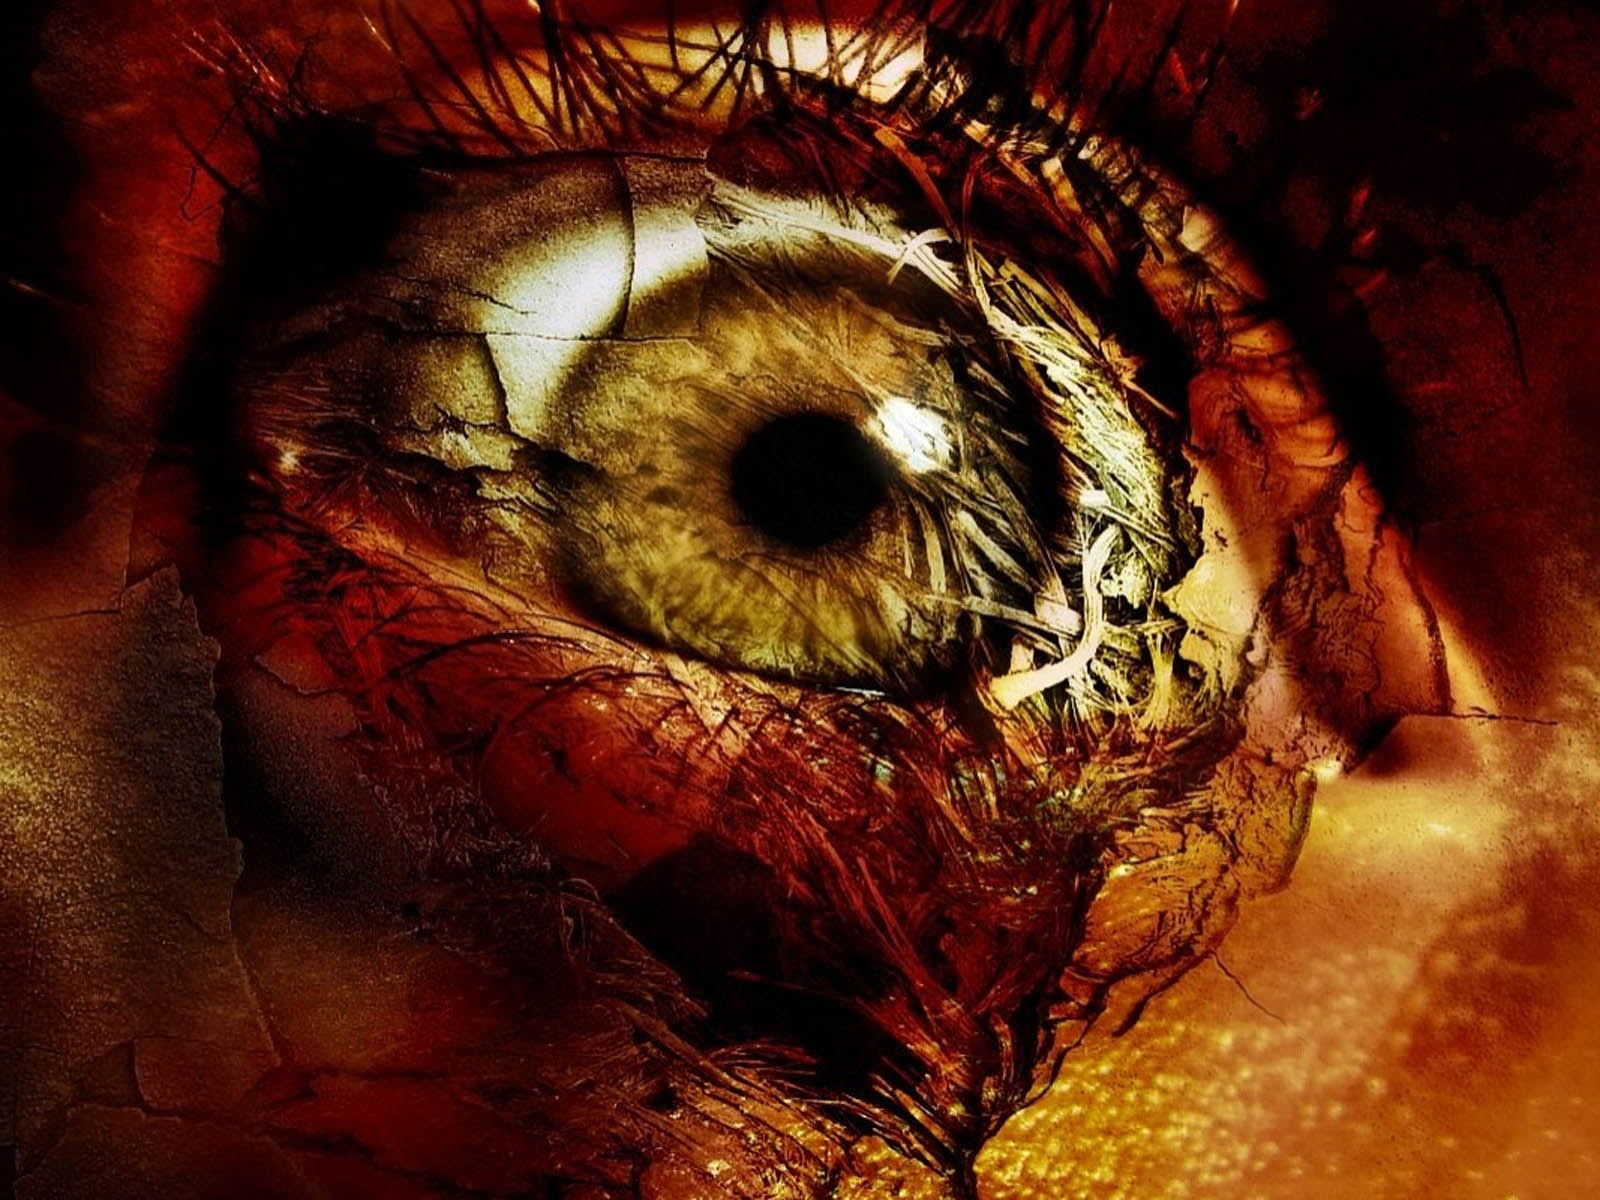 Tag Horror Eye Wallpaper Image Photos Pictures And Background For